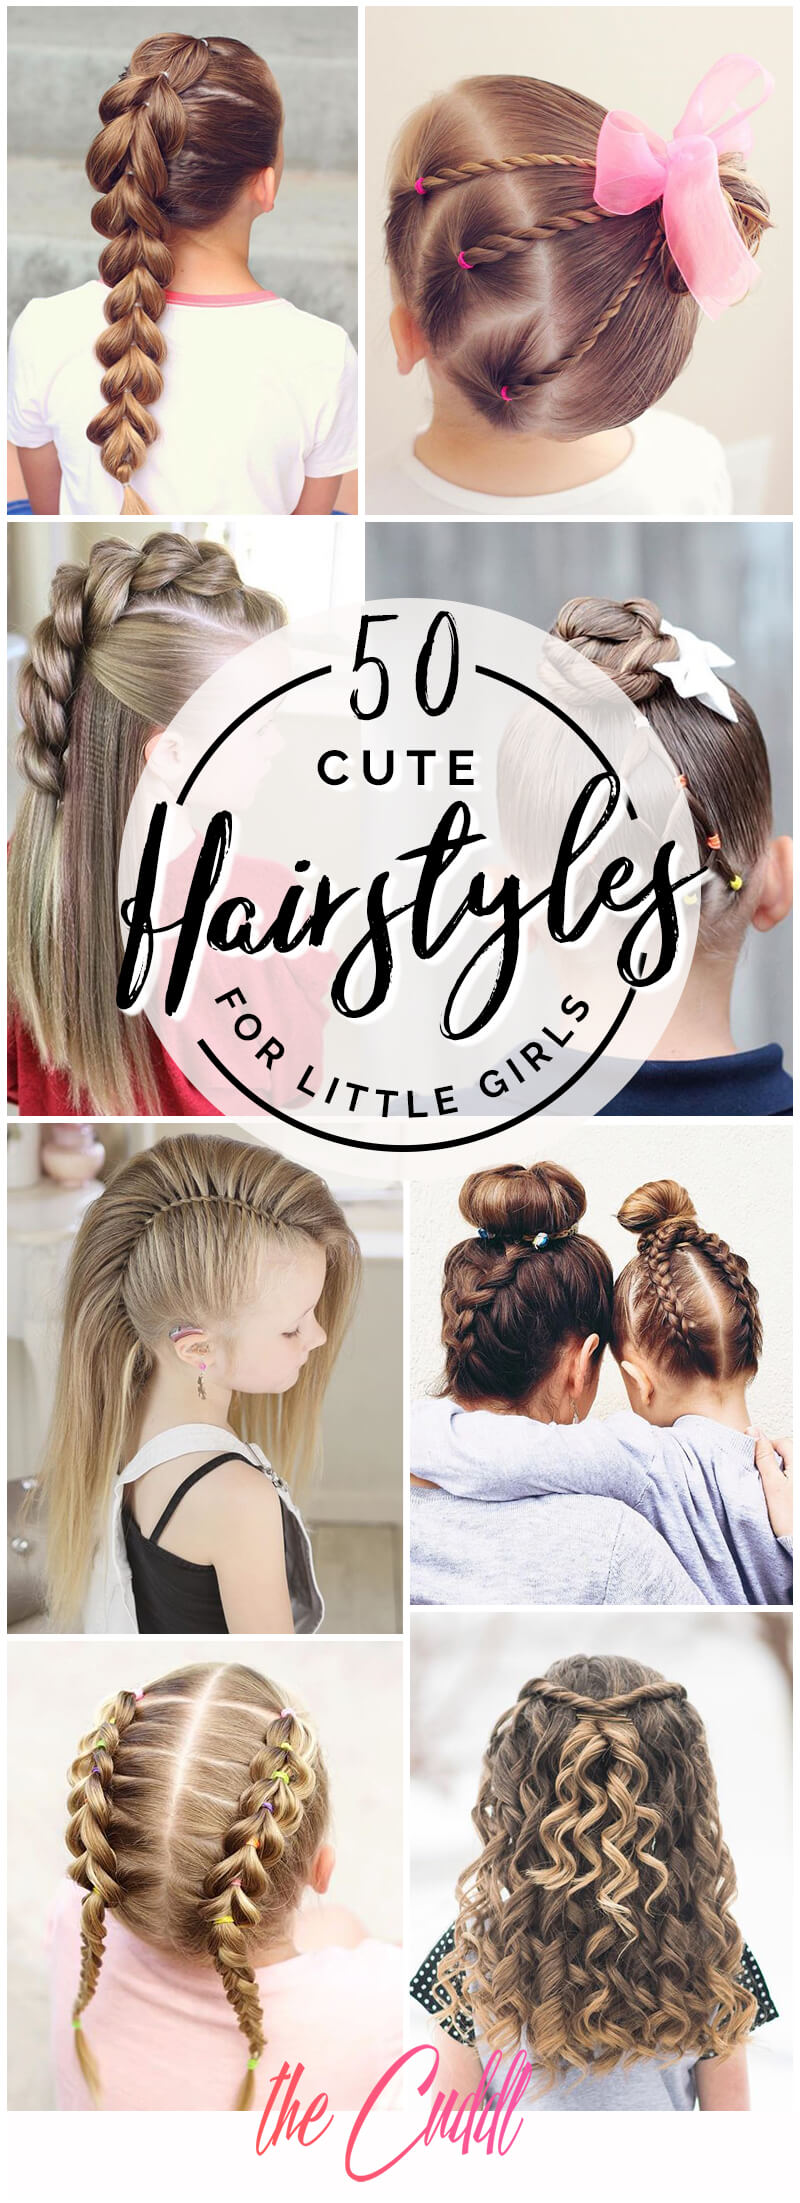 50 pretty perfect cute hairstyles for little girls to show